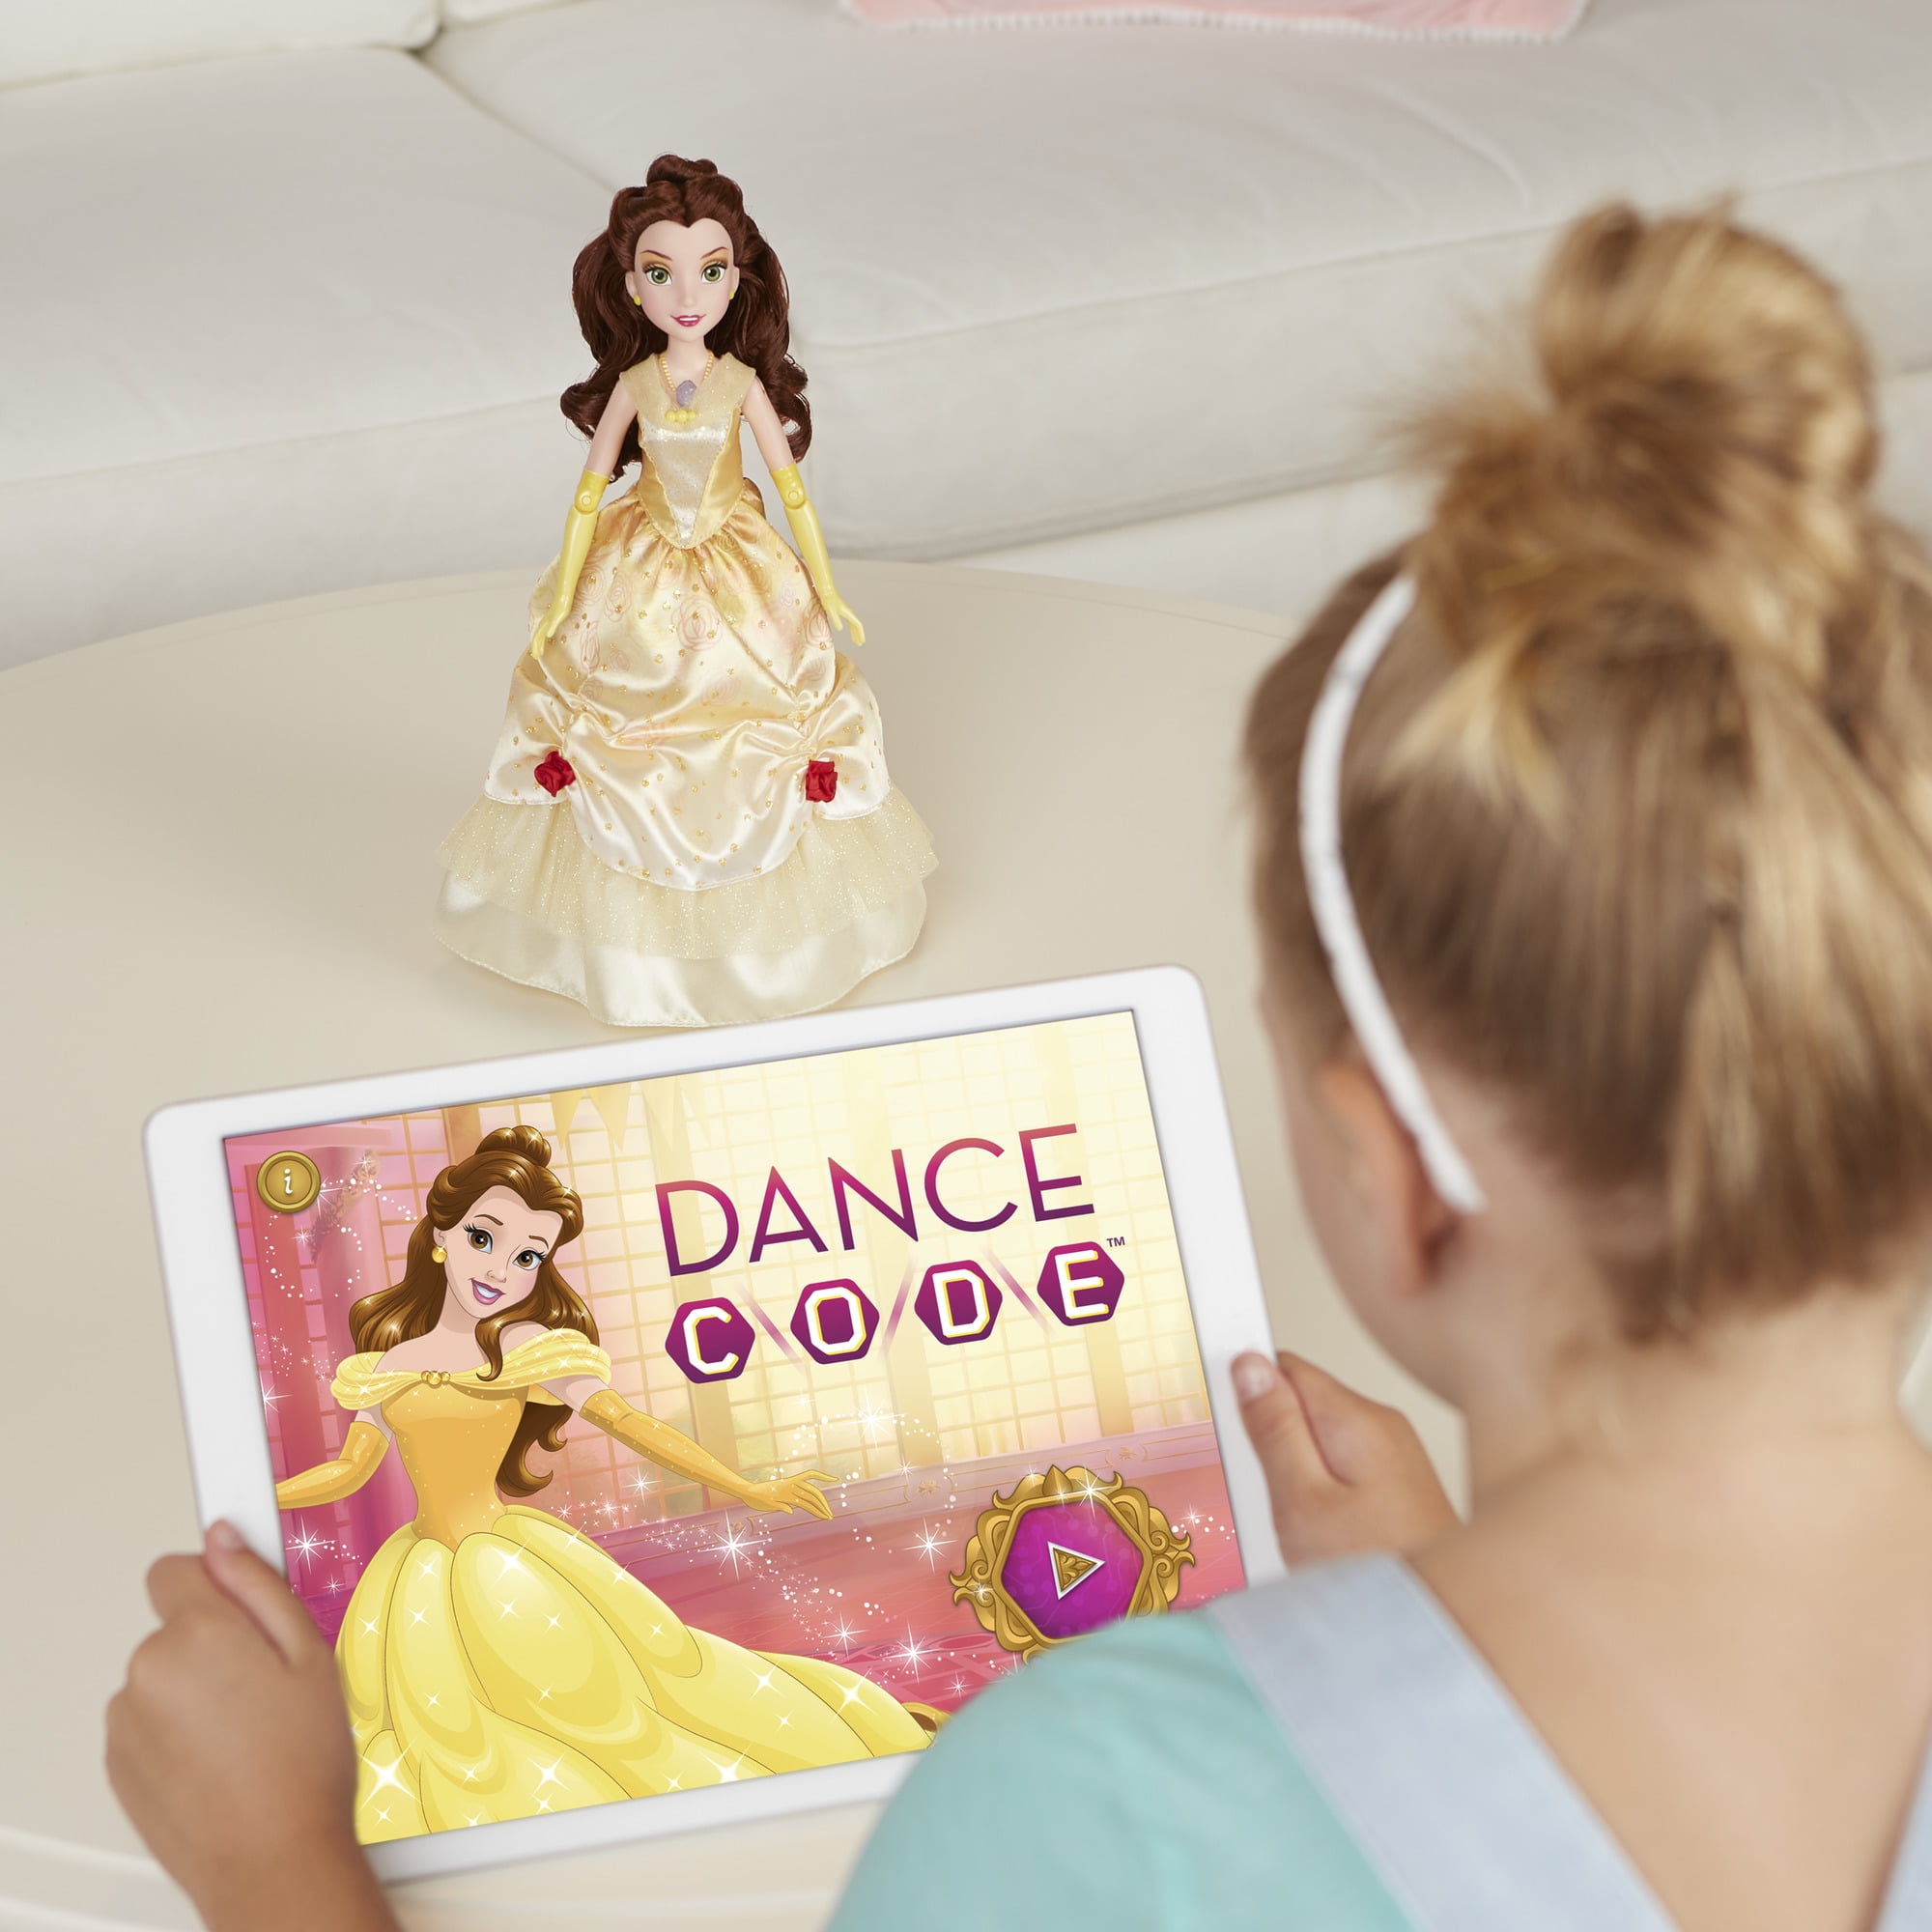 Dance Code Featuring Disney Princess Belle, 100+ Phrases And Plays 7 Songs